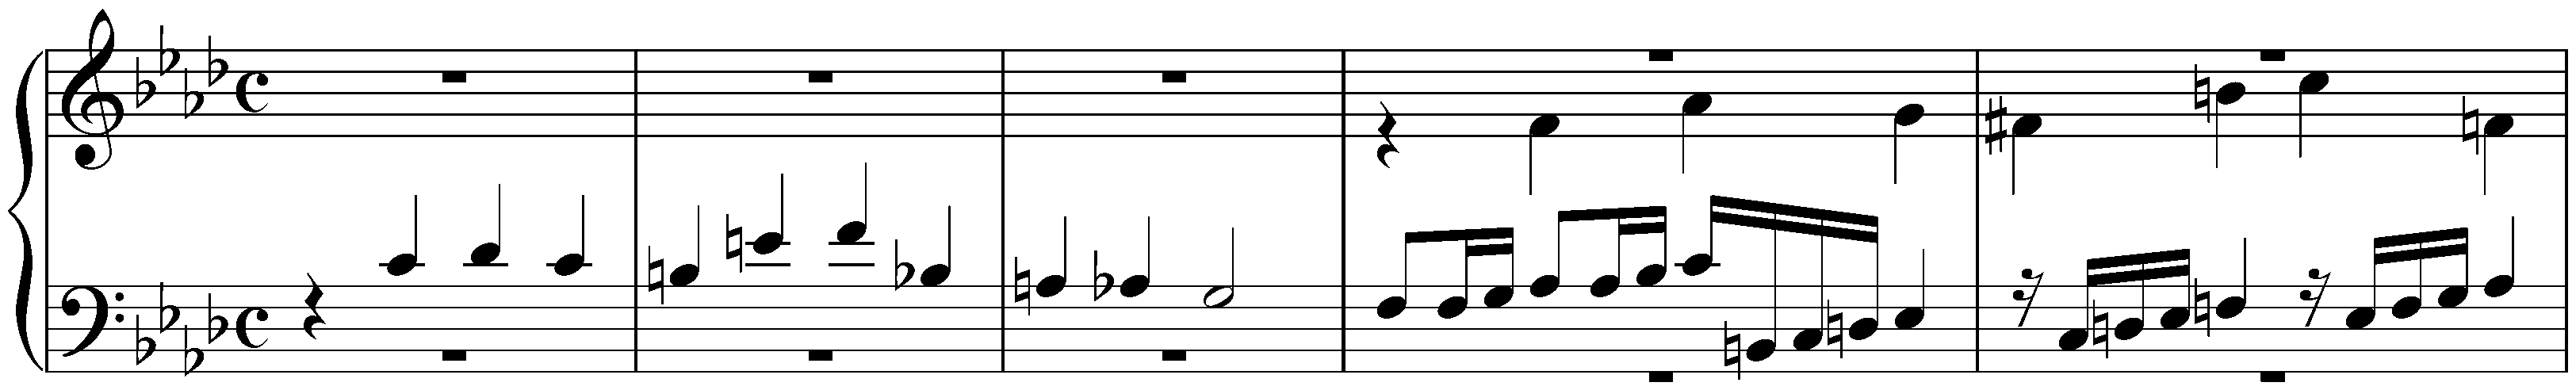 The Well-Tempered Clavier, Book 1, BWV 846–869; 12. F minor, BWV 857, Fugue